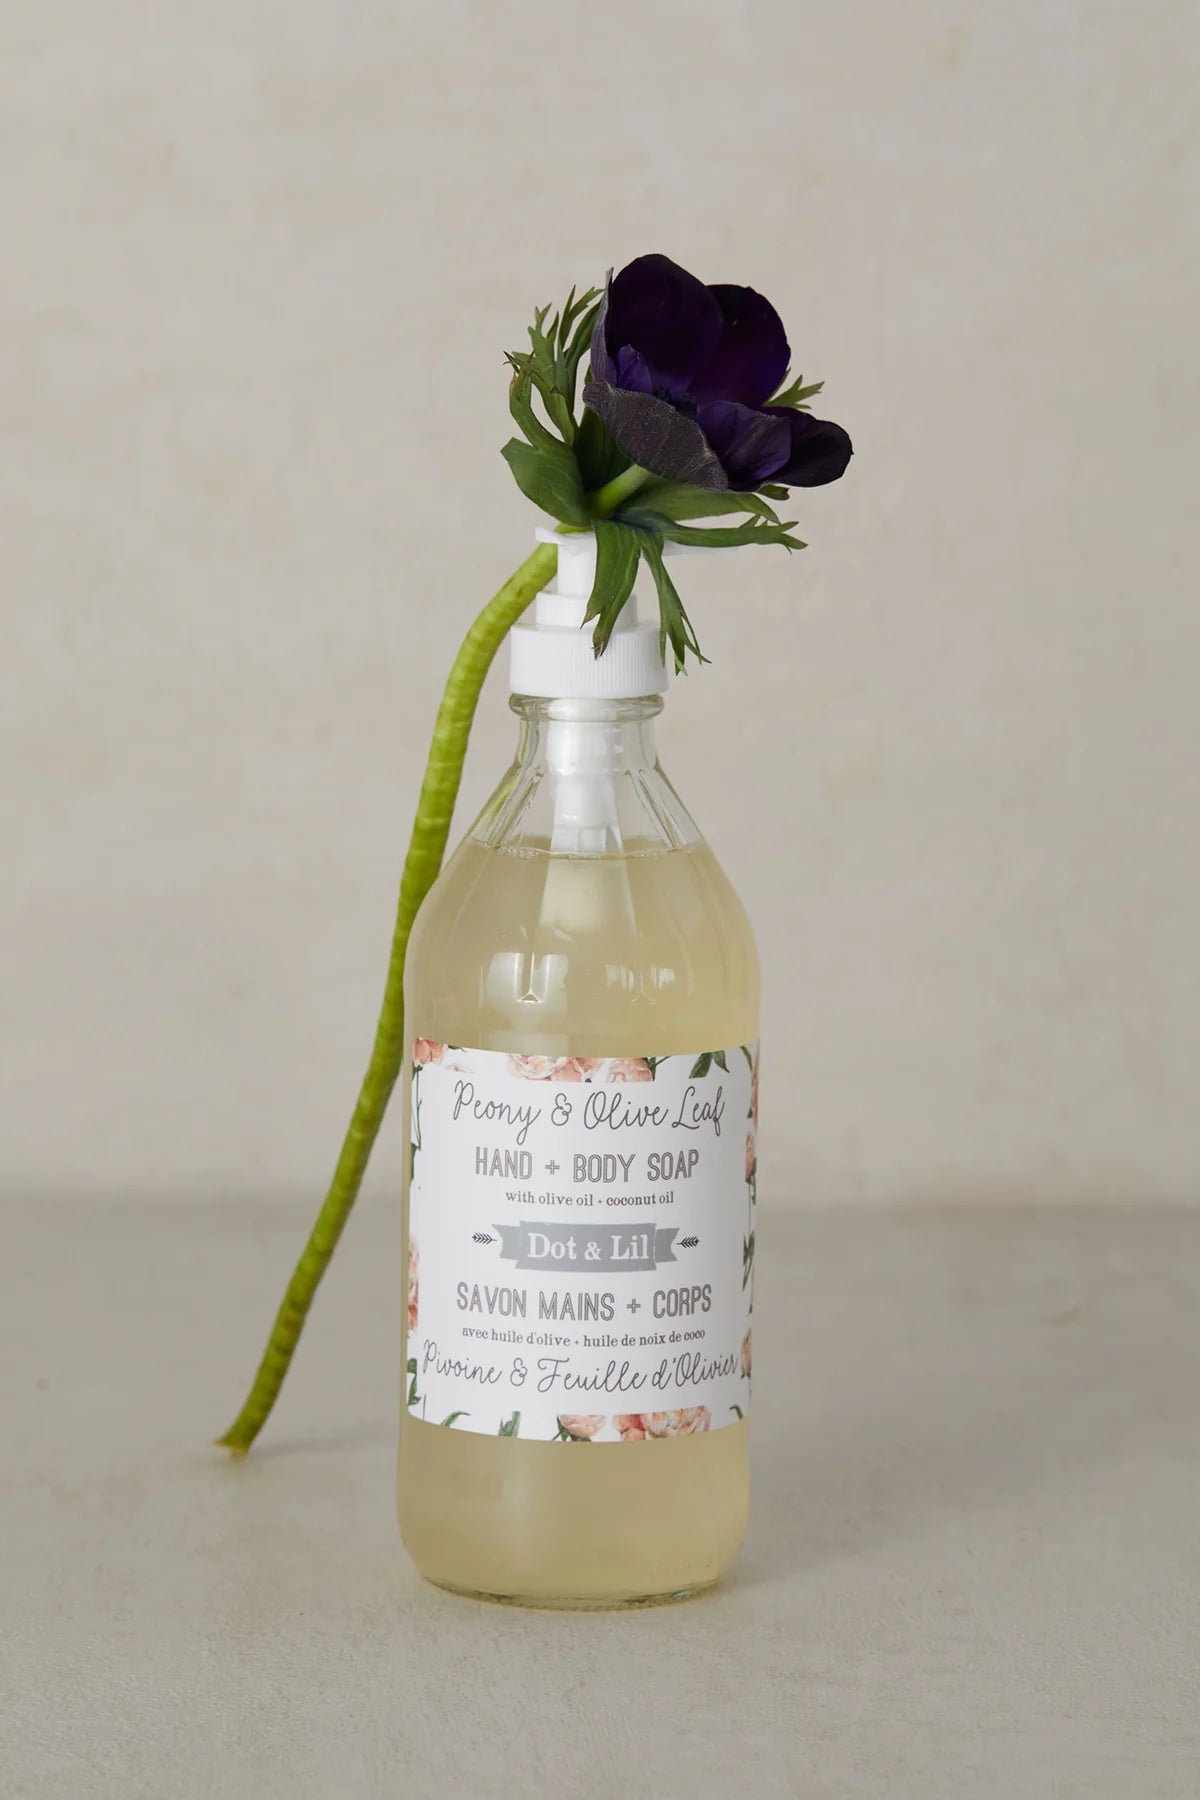 Liquid soap (hands and body) - Peony and olive leaf